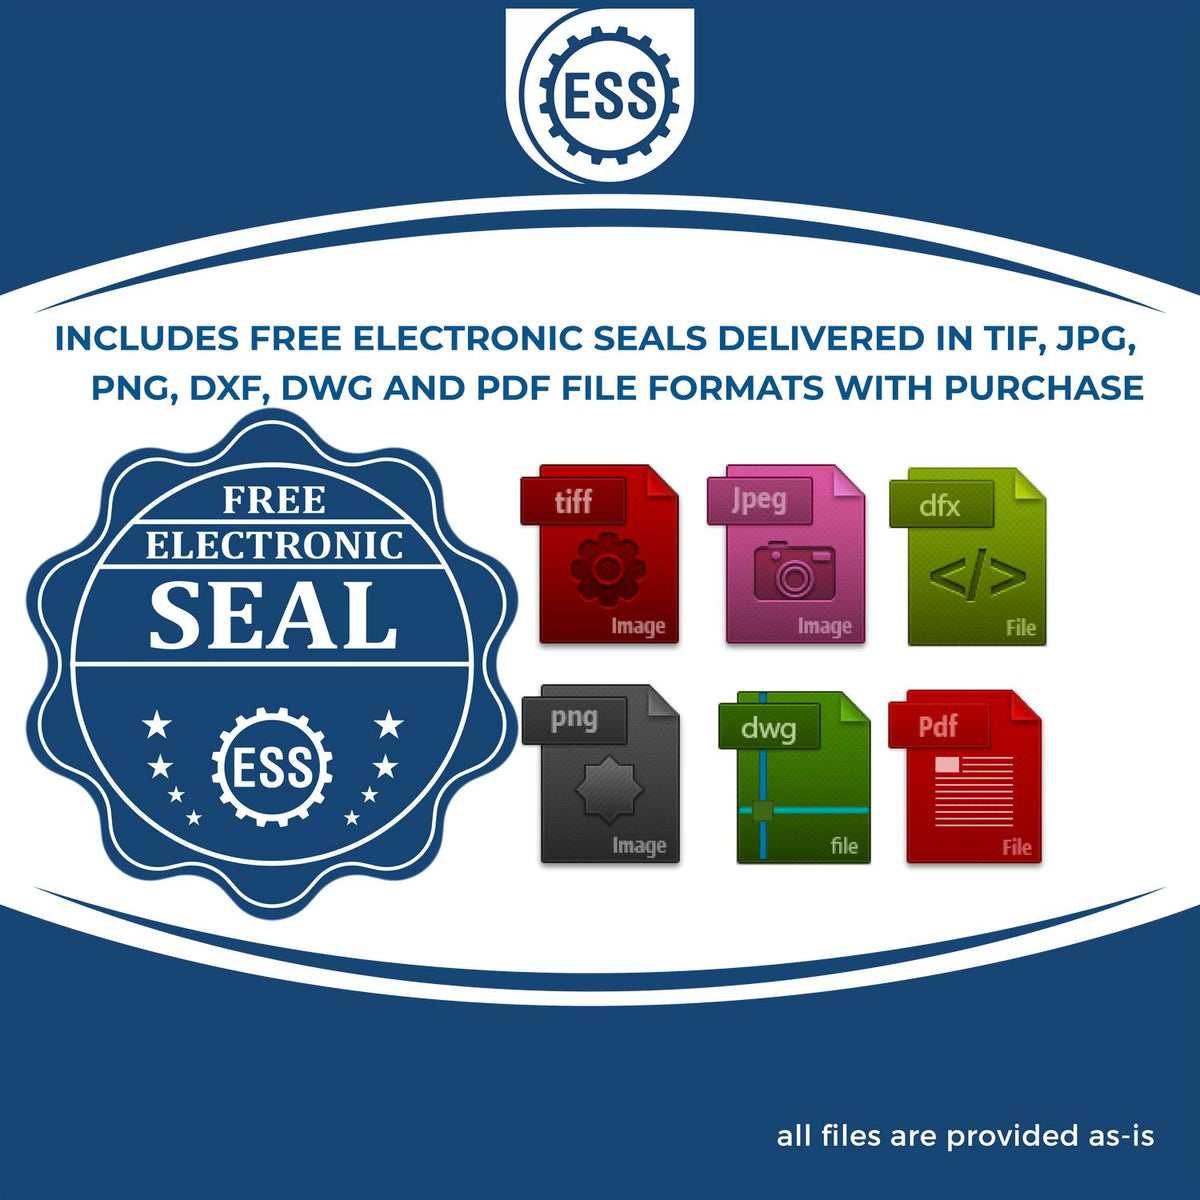 An infographic for the free electronic seal for the Hybrid California Engineer Seal illustrating the different file type icons such as DXF, DWG, TIF, JPG and PNG.